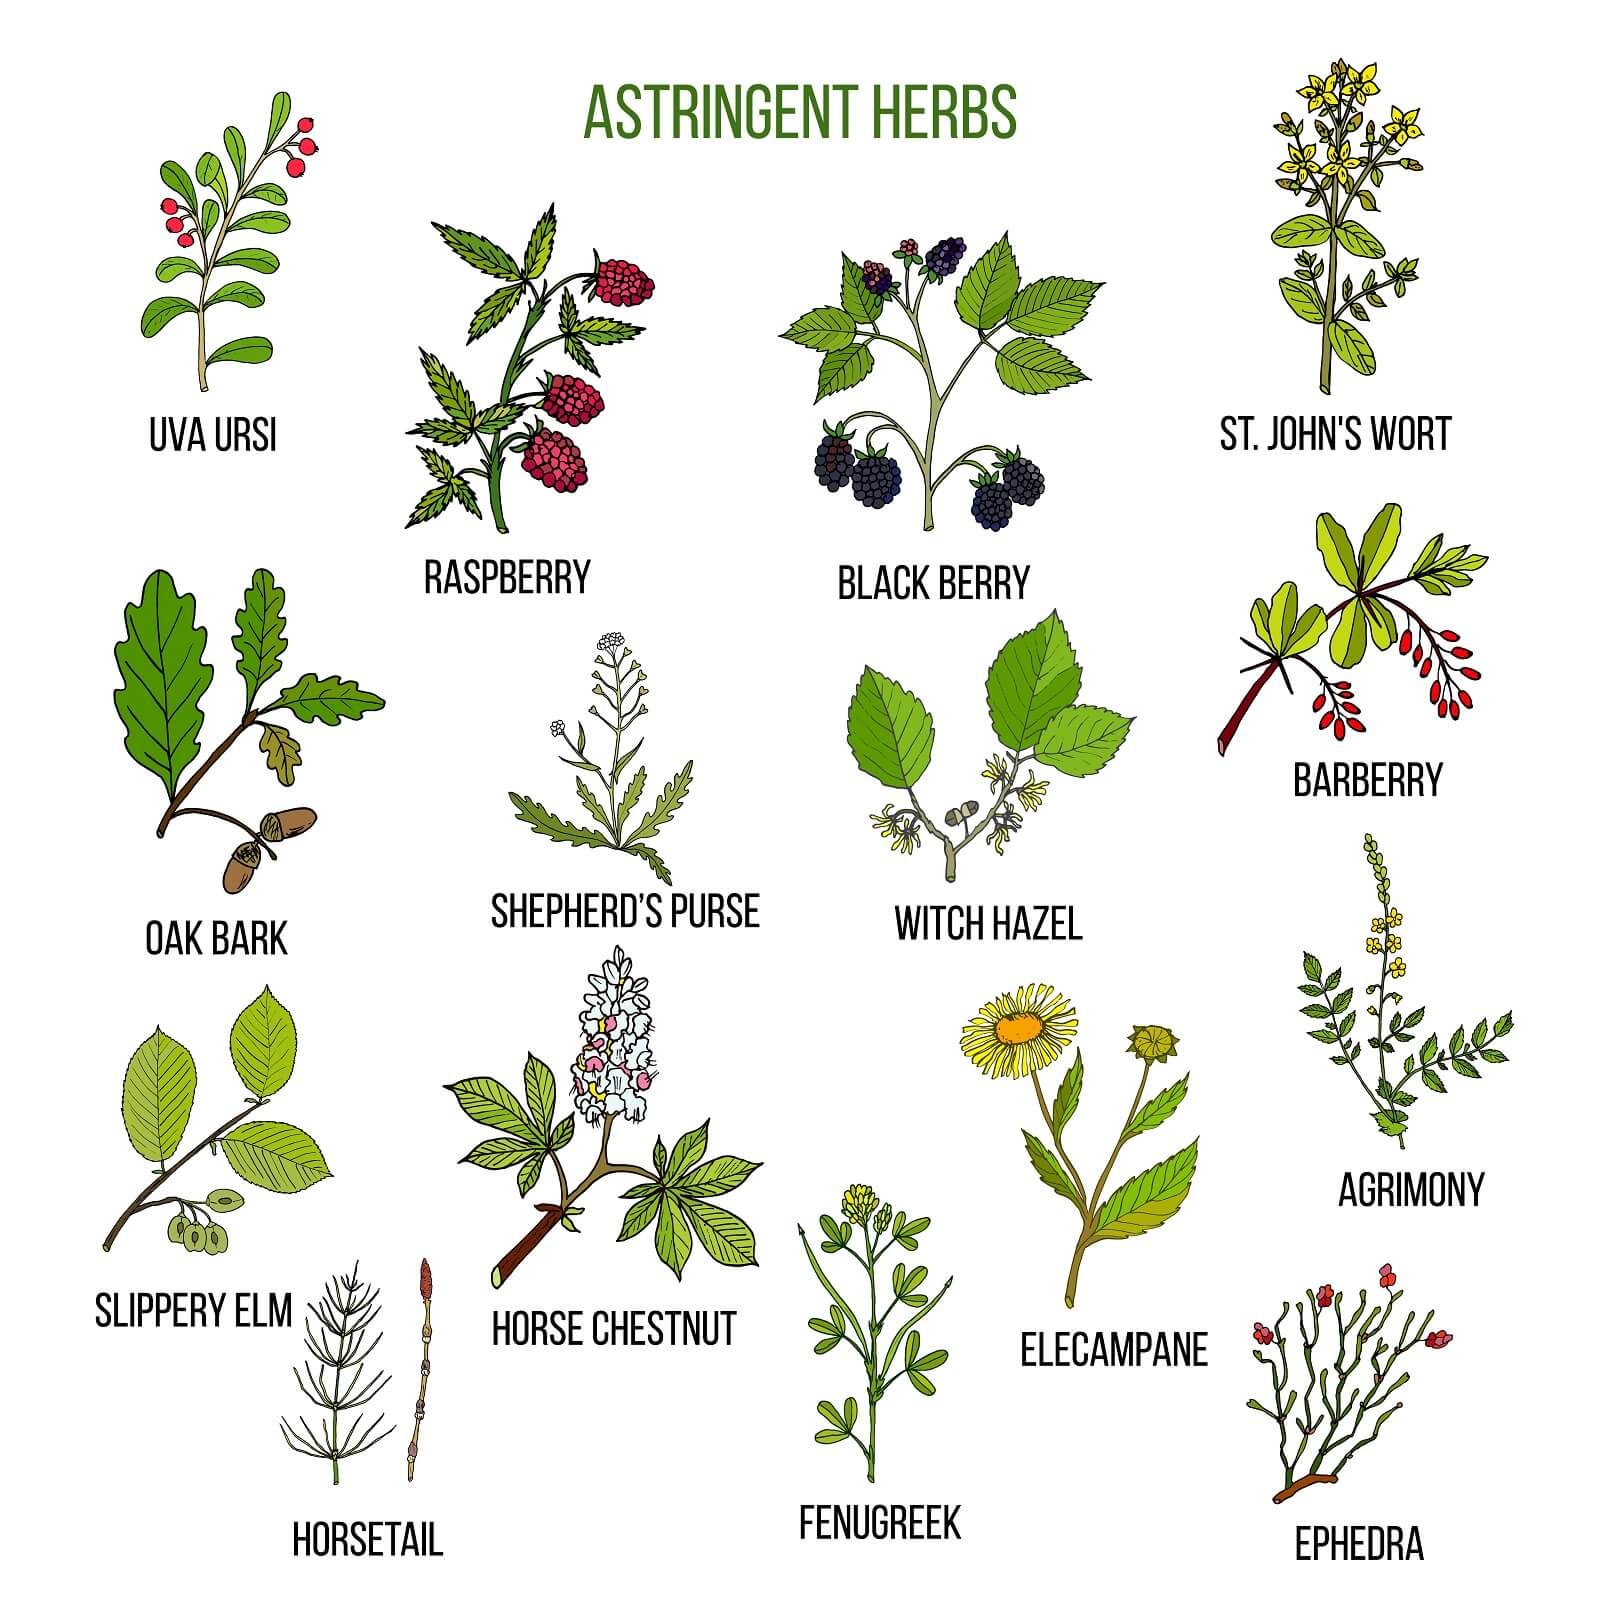 a picture of several different astringent herbs.